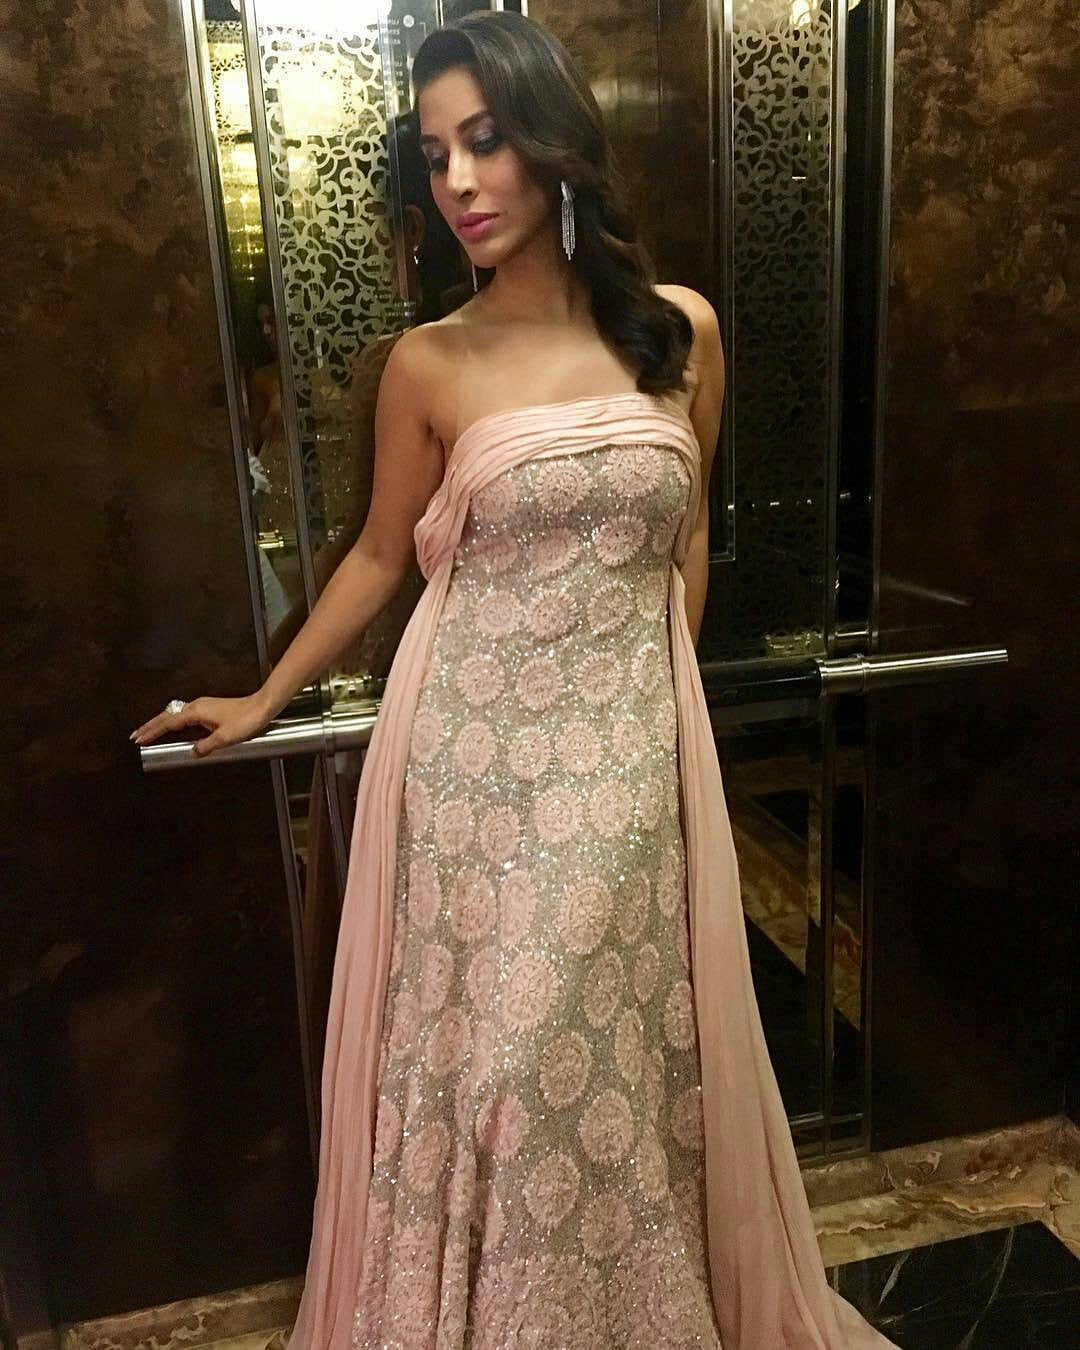 Sophie Choudry Looked Attractive In Manish Malhotra’s Designer Gown